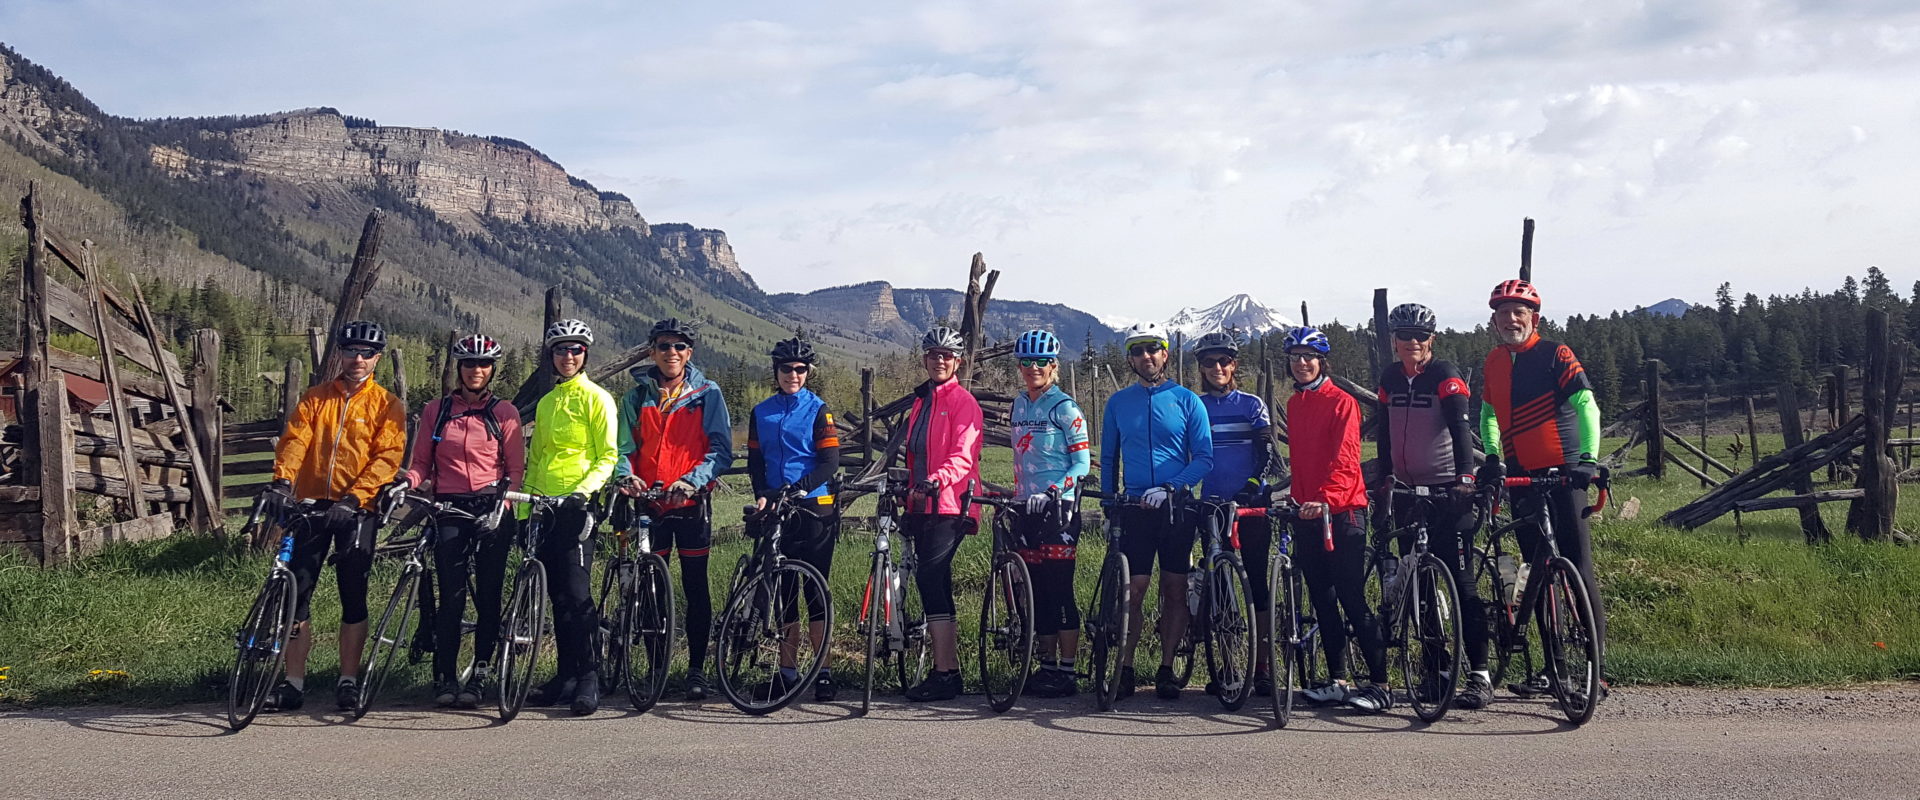 Twelve people standing with their bikes on the side of a road. There are mountains in the background.